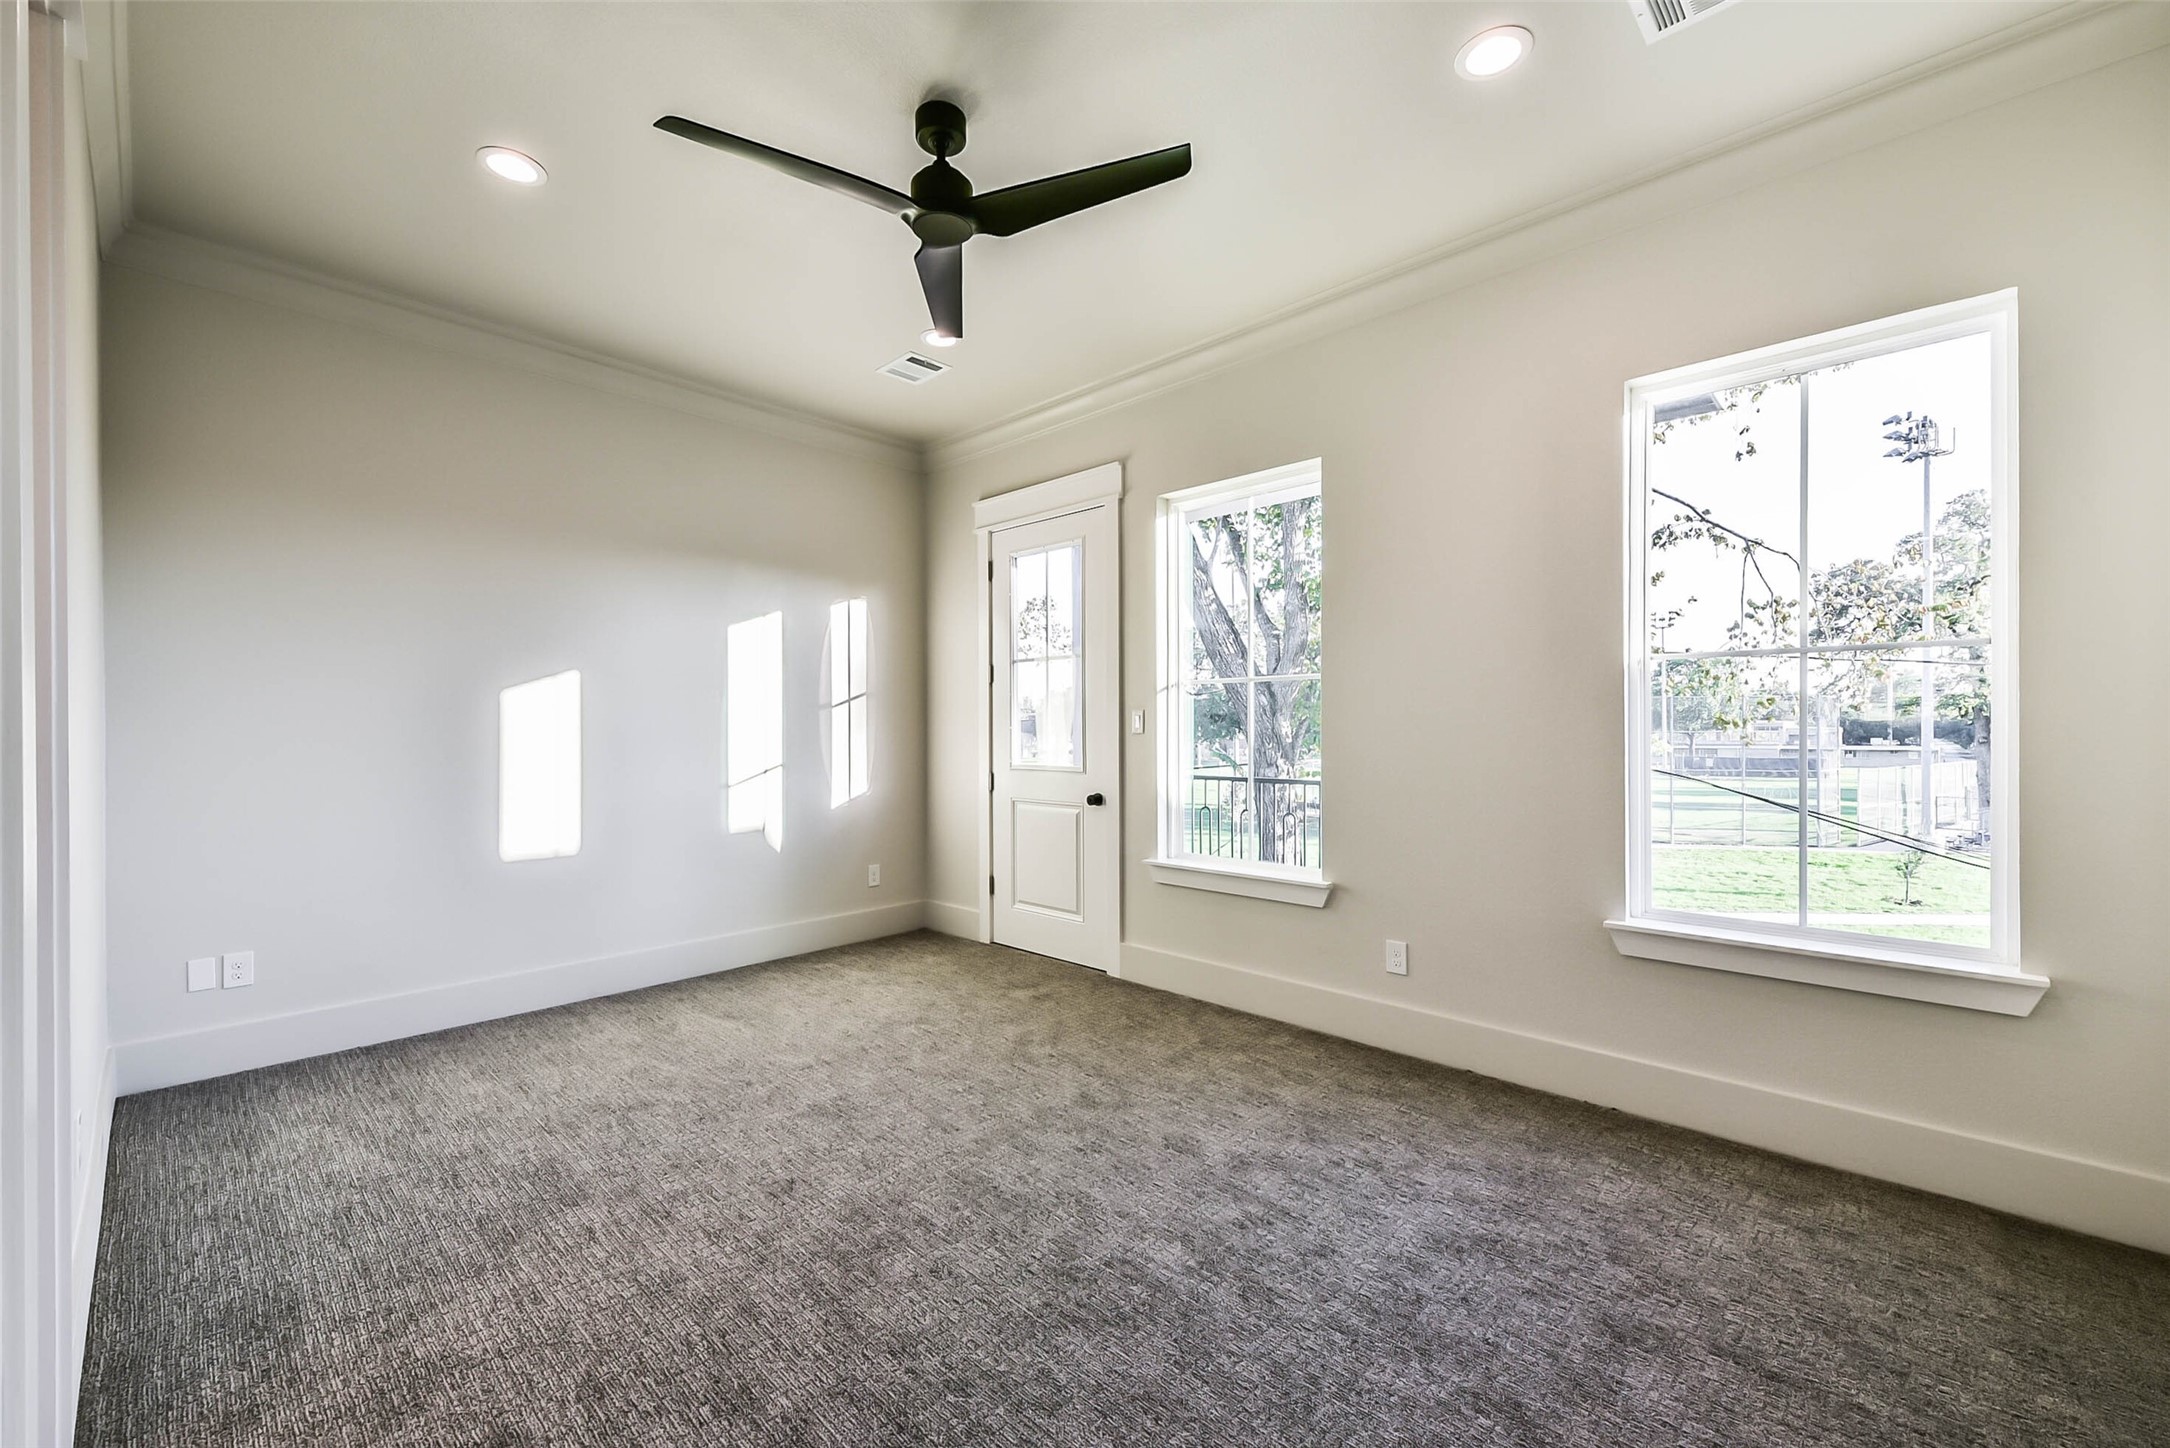 Large secondary bedrooms with high ceilings, recessed lights and divided light windows.